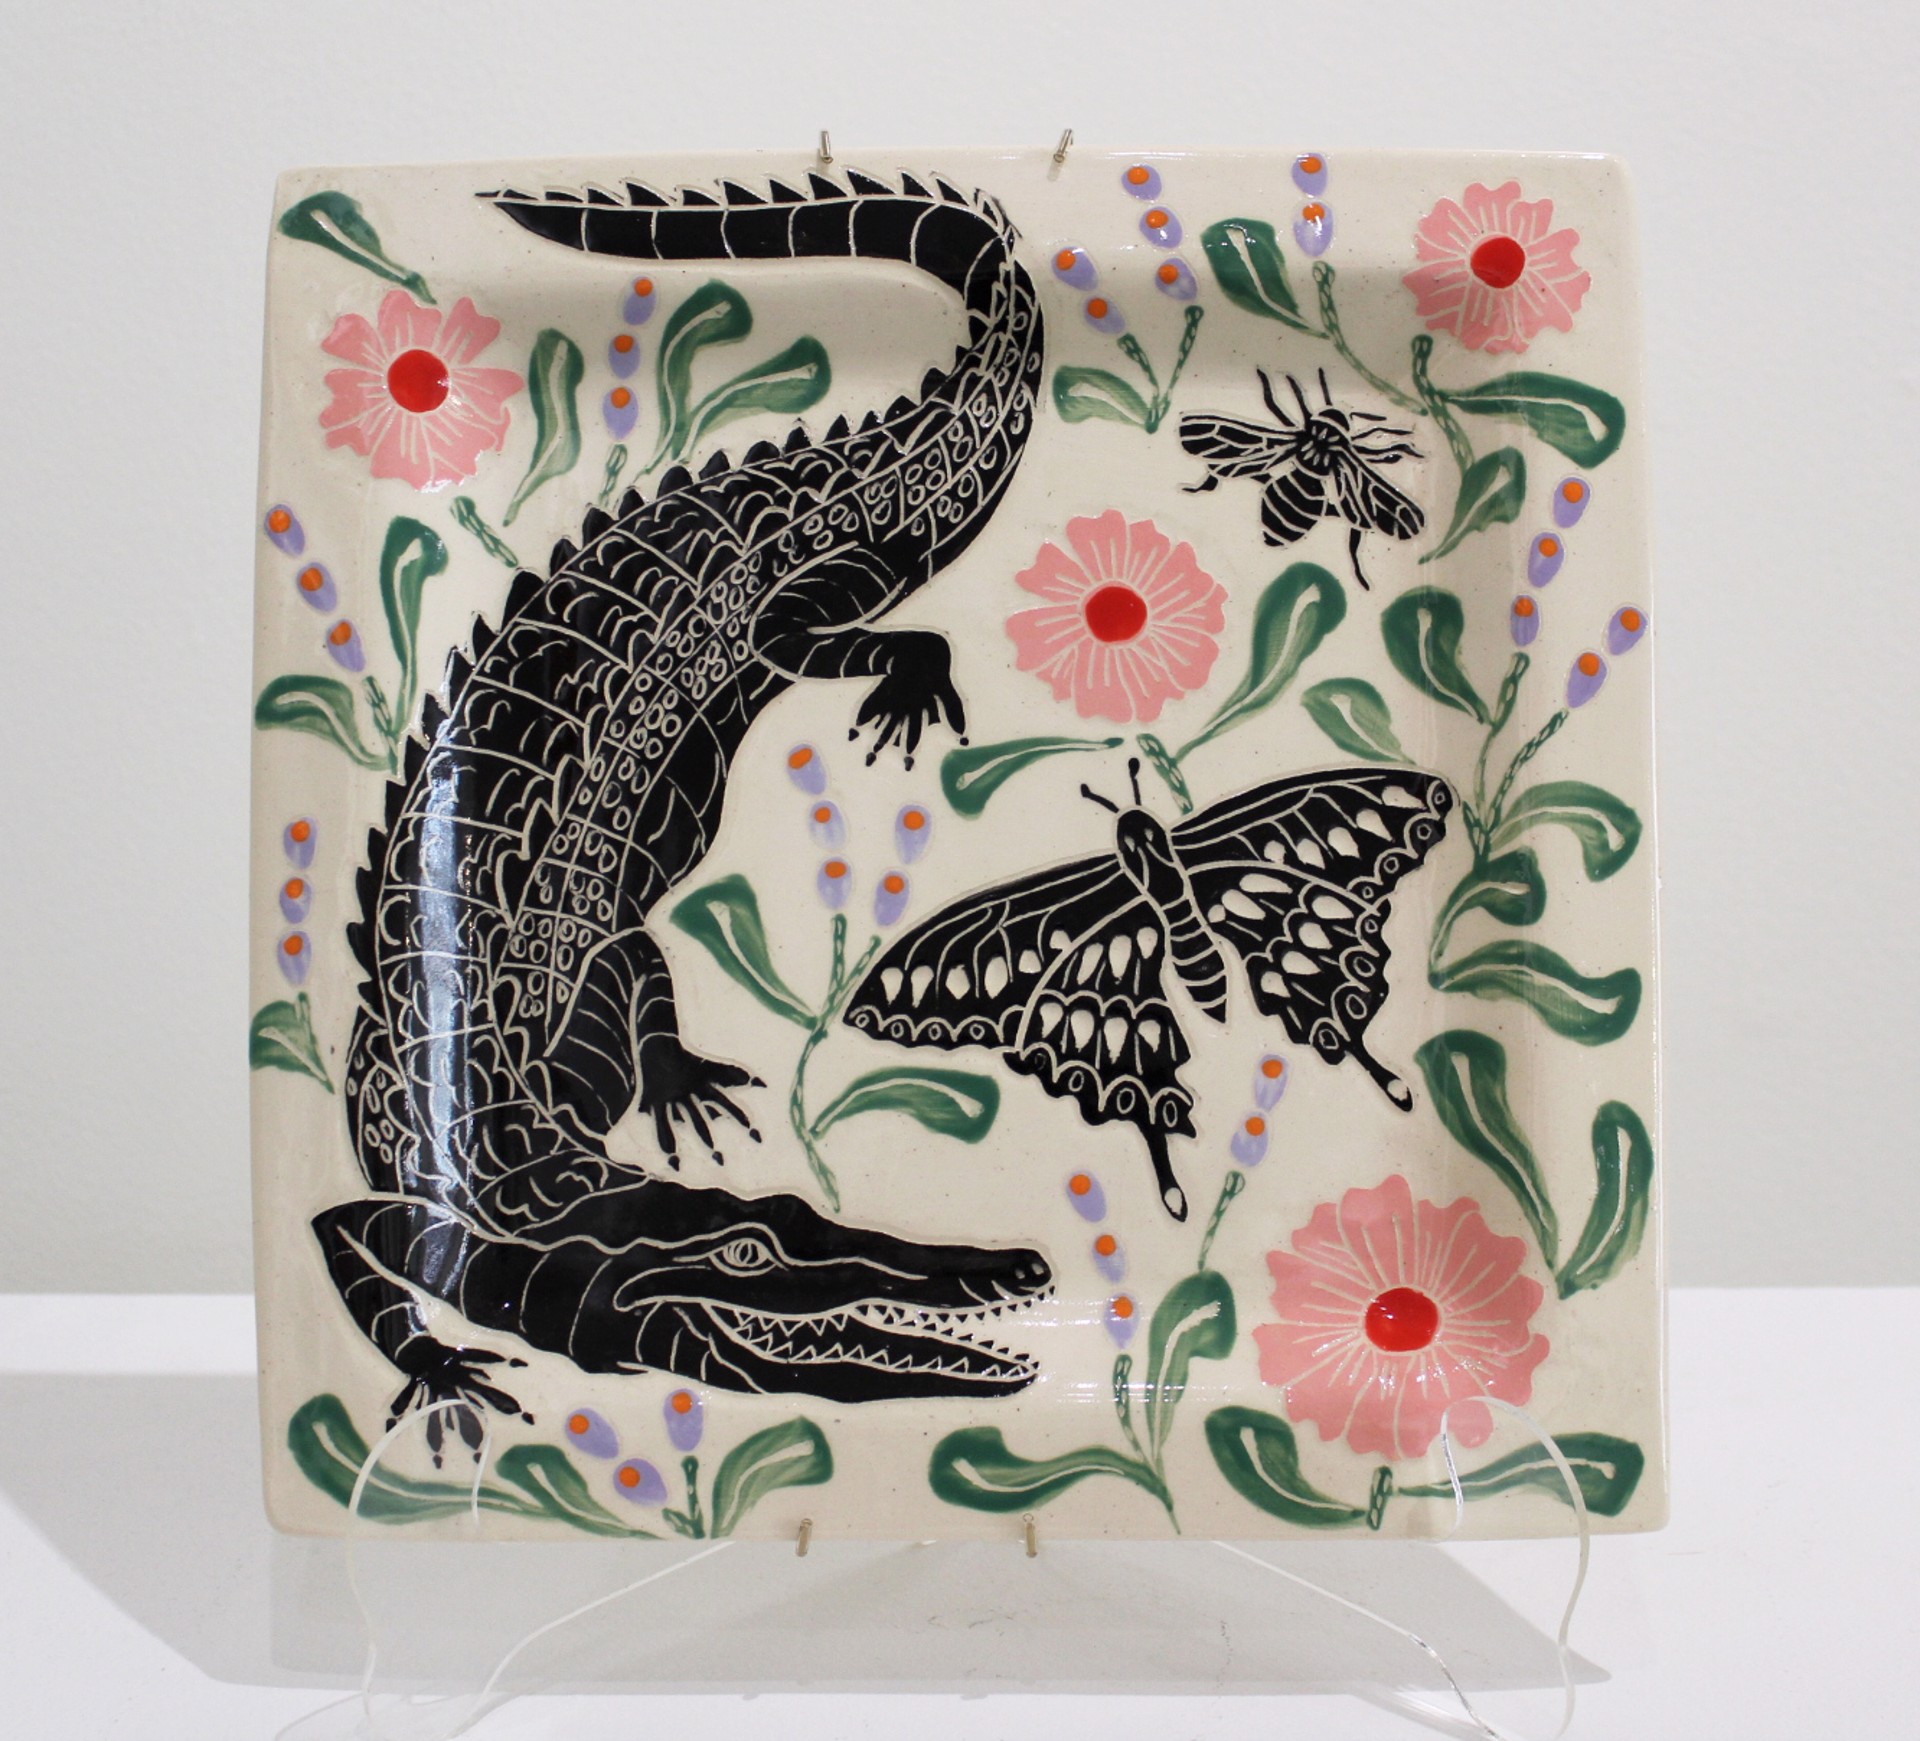 Plate with Alligator, Moth & Bee by Abbey Kuhe